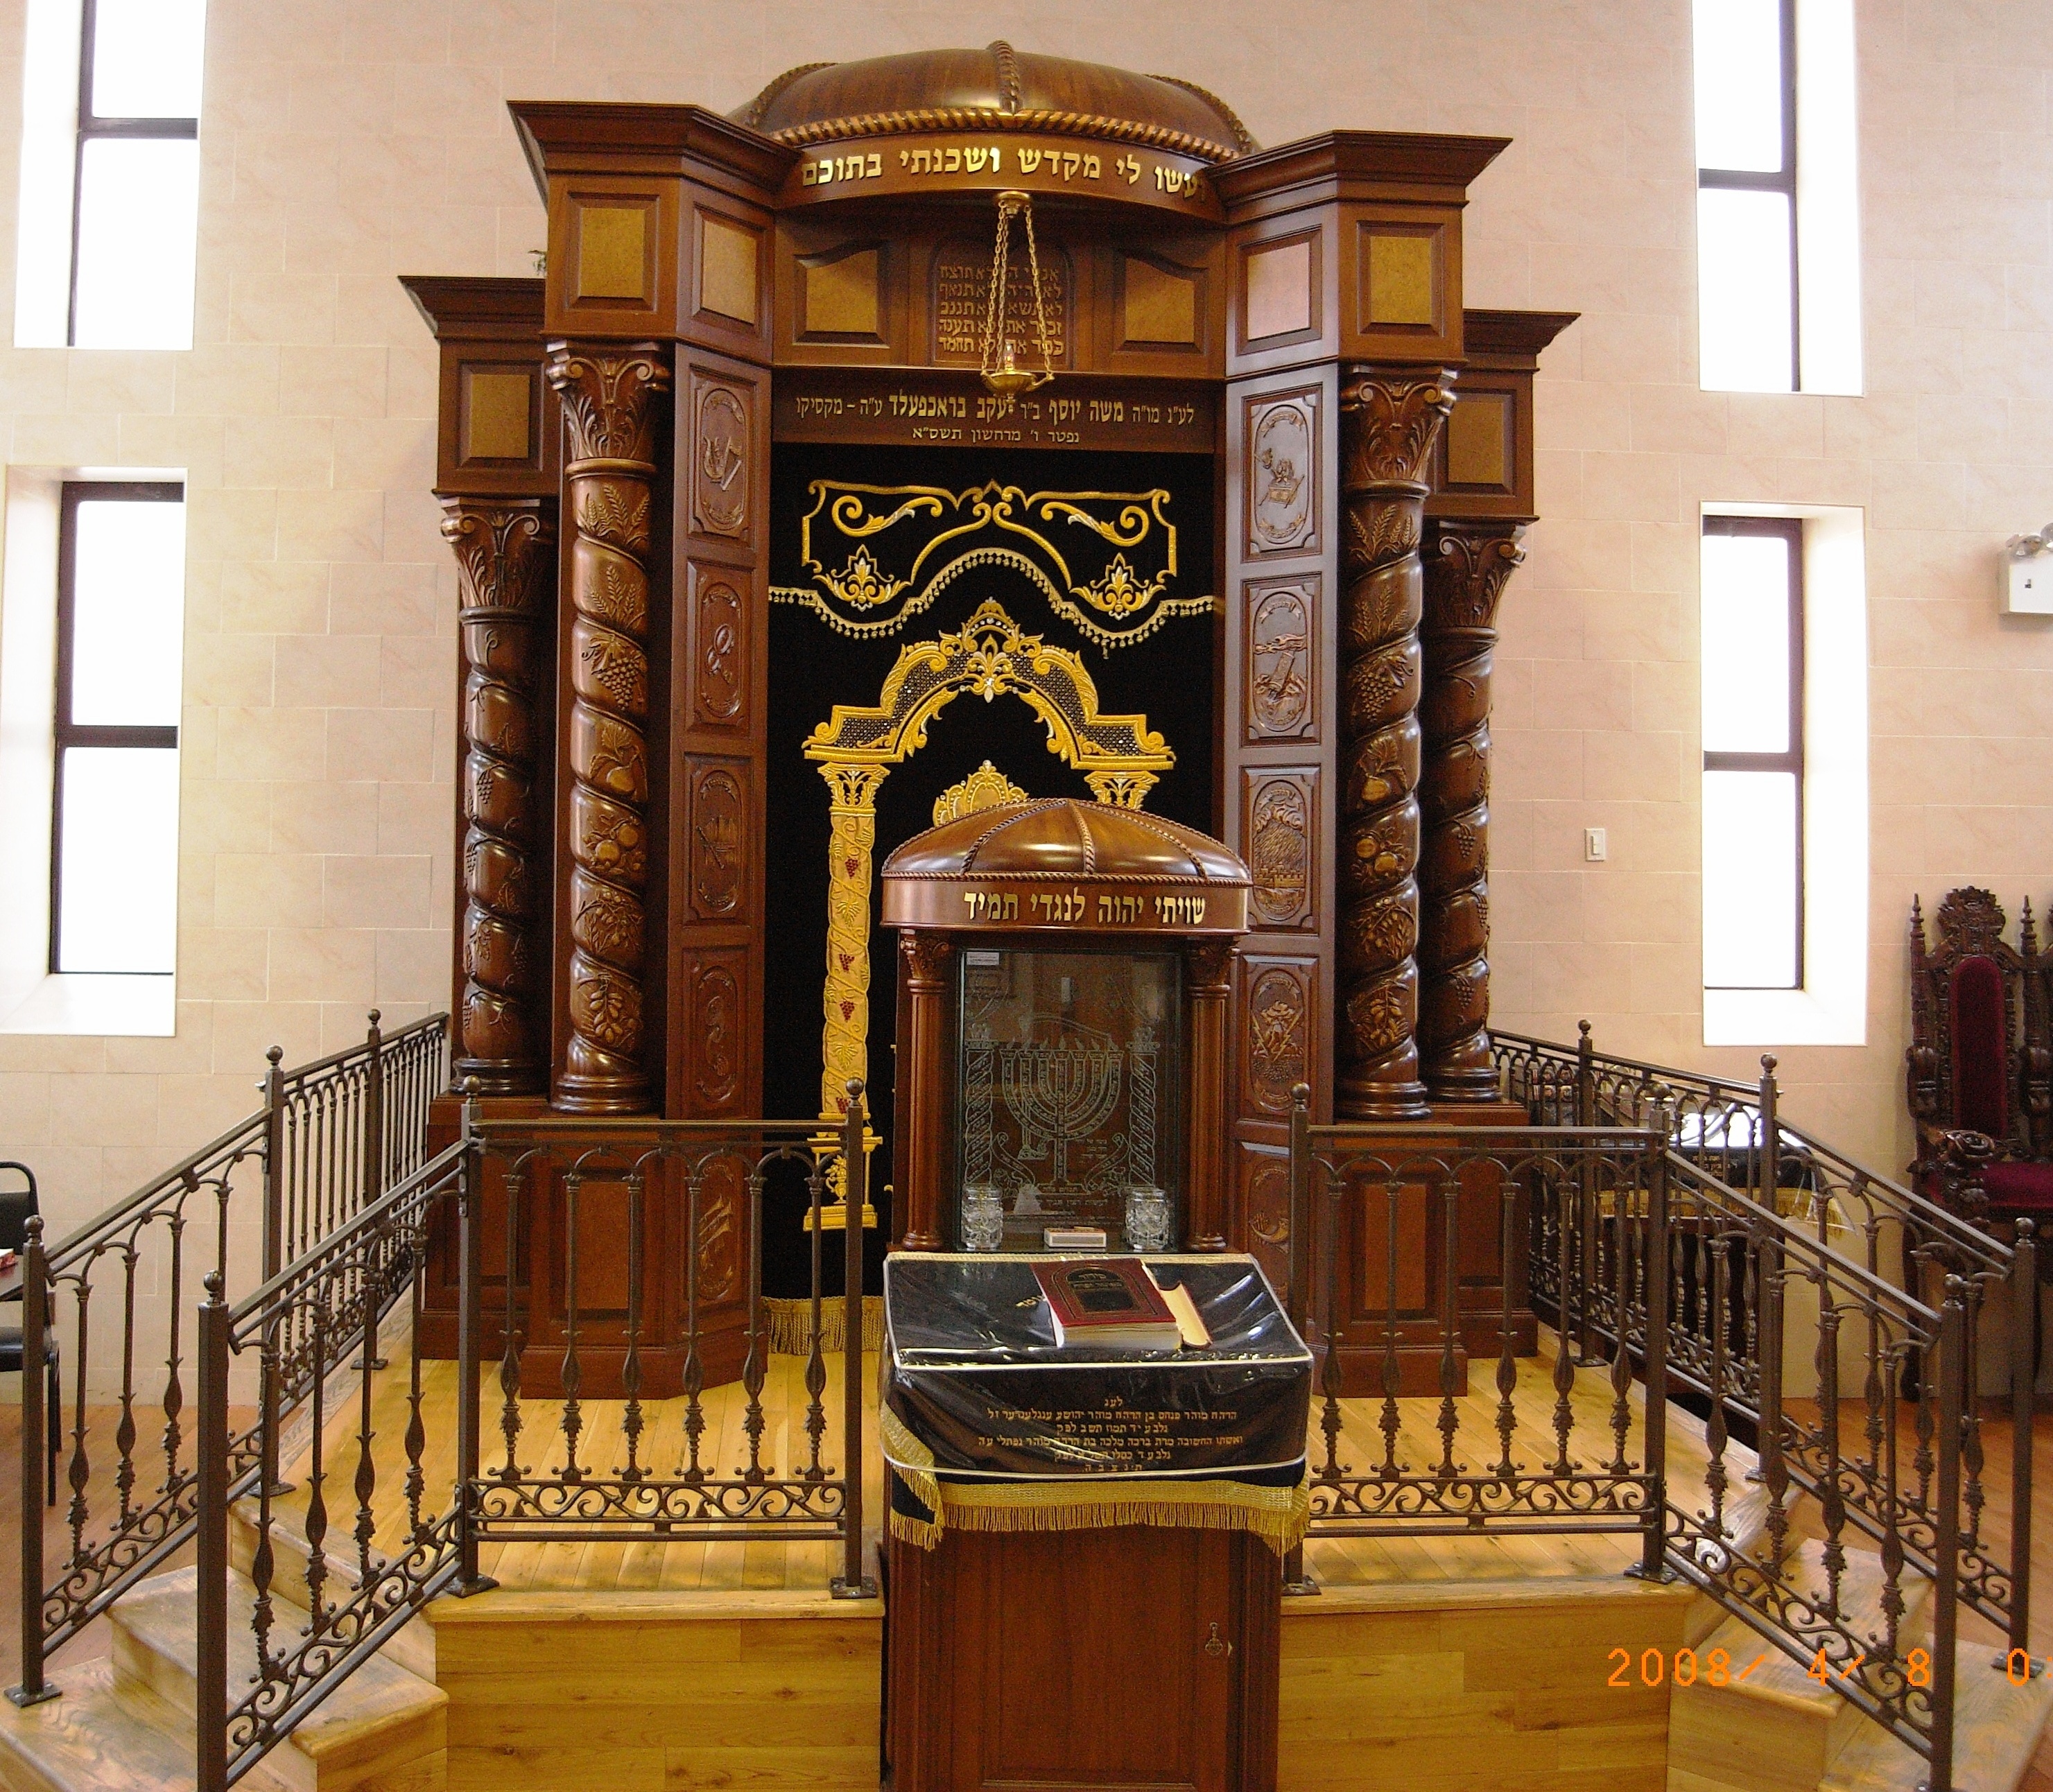 View of wooden work inside a Jewish temple